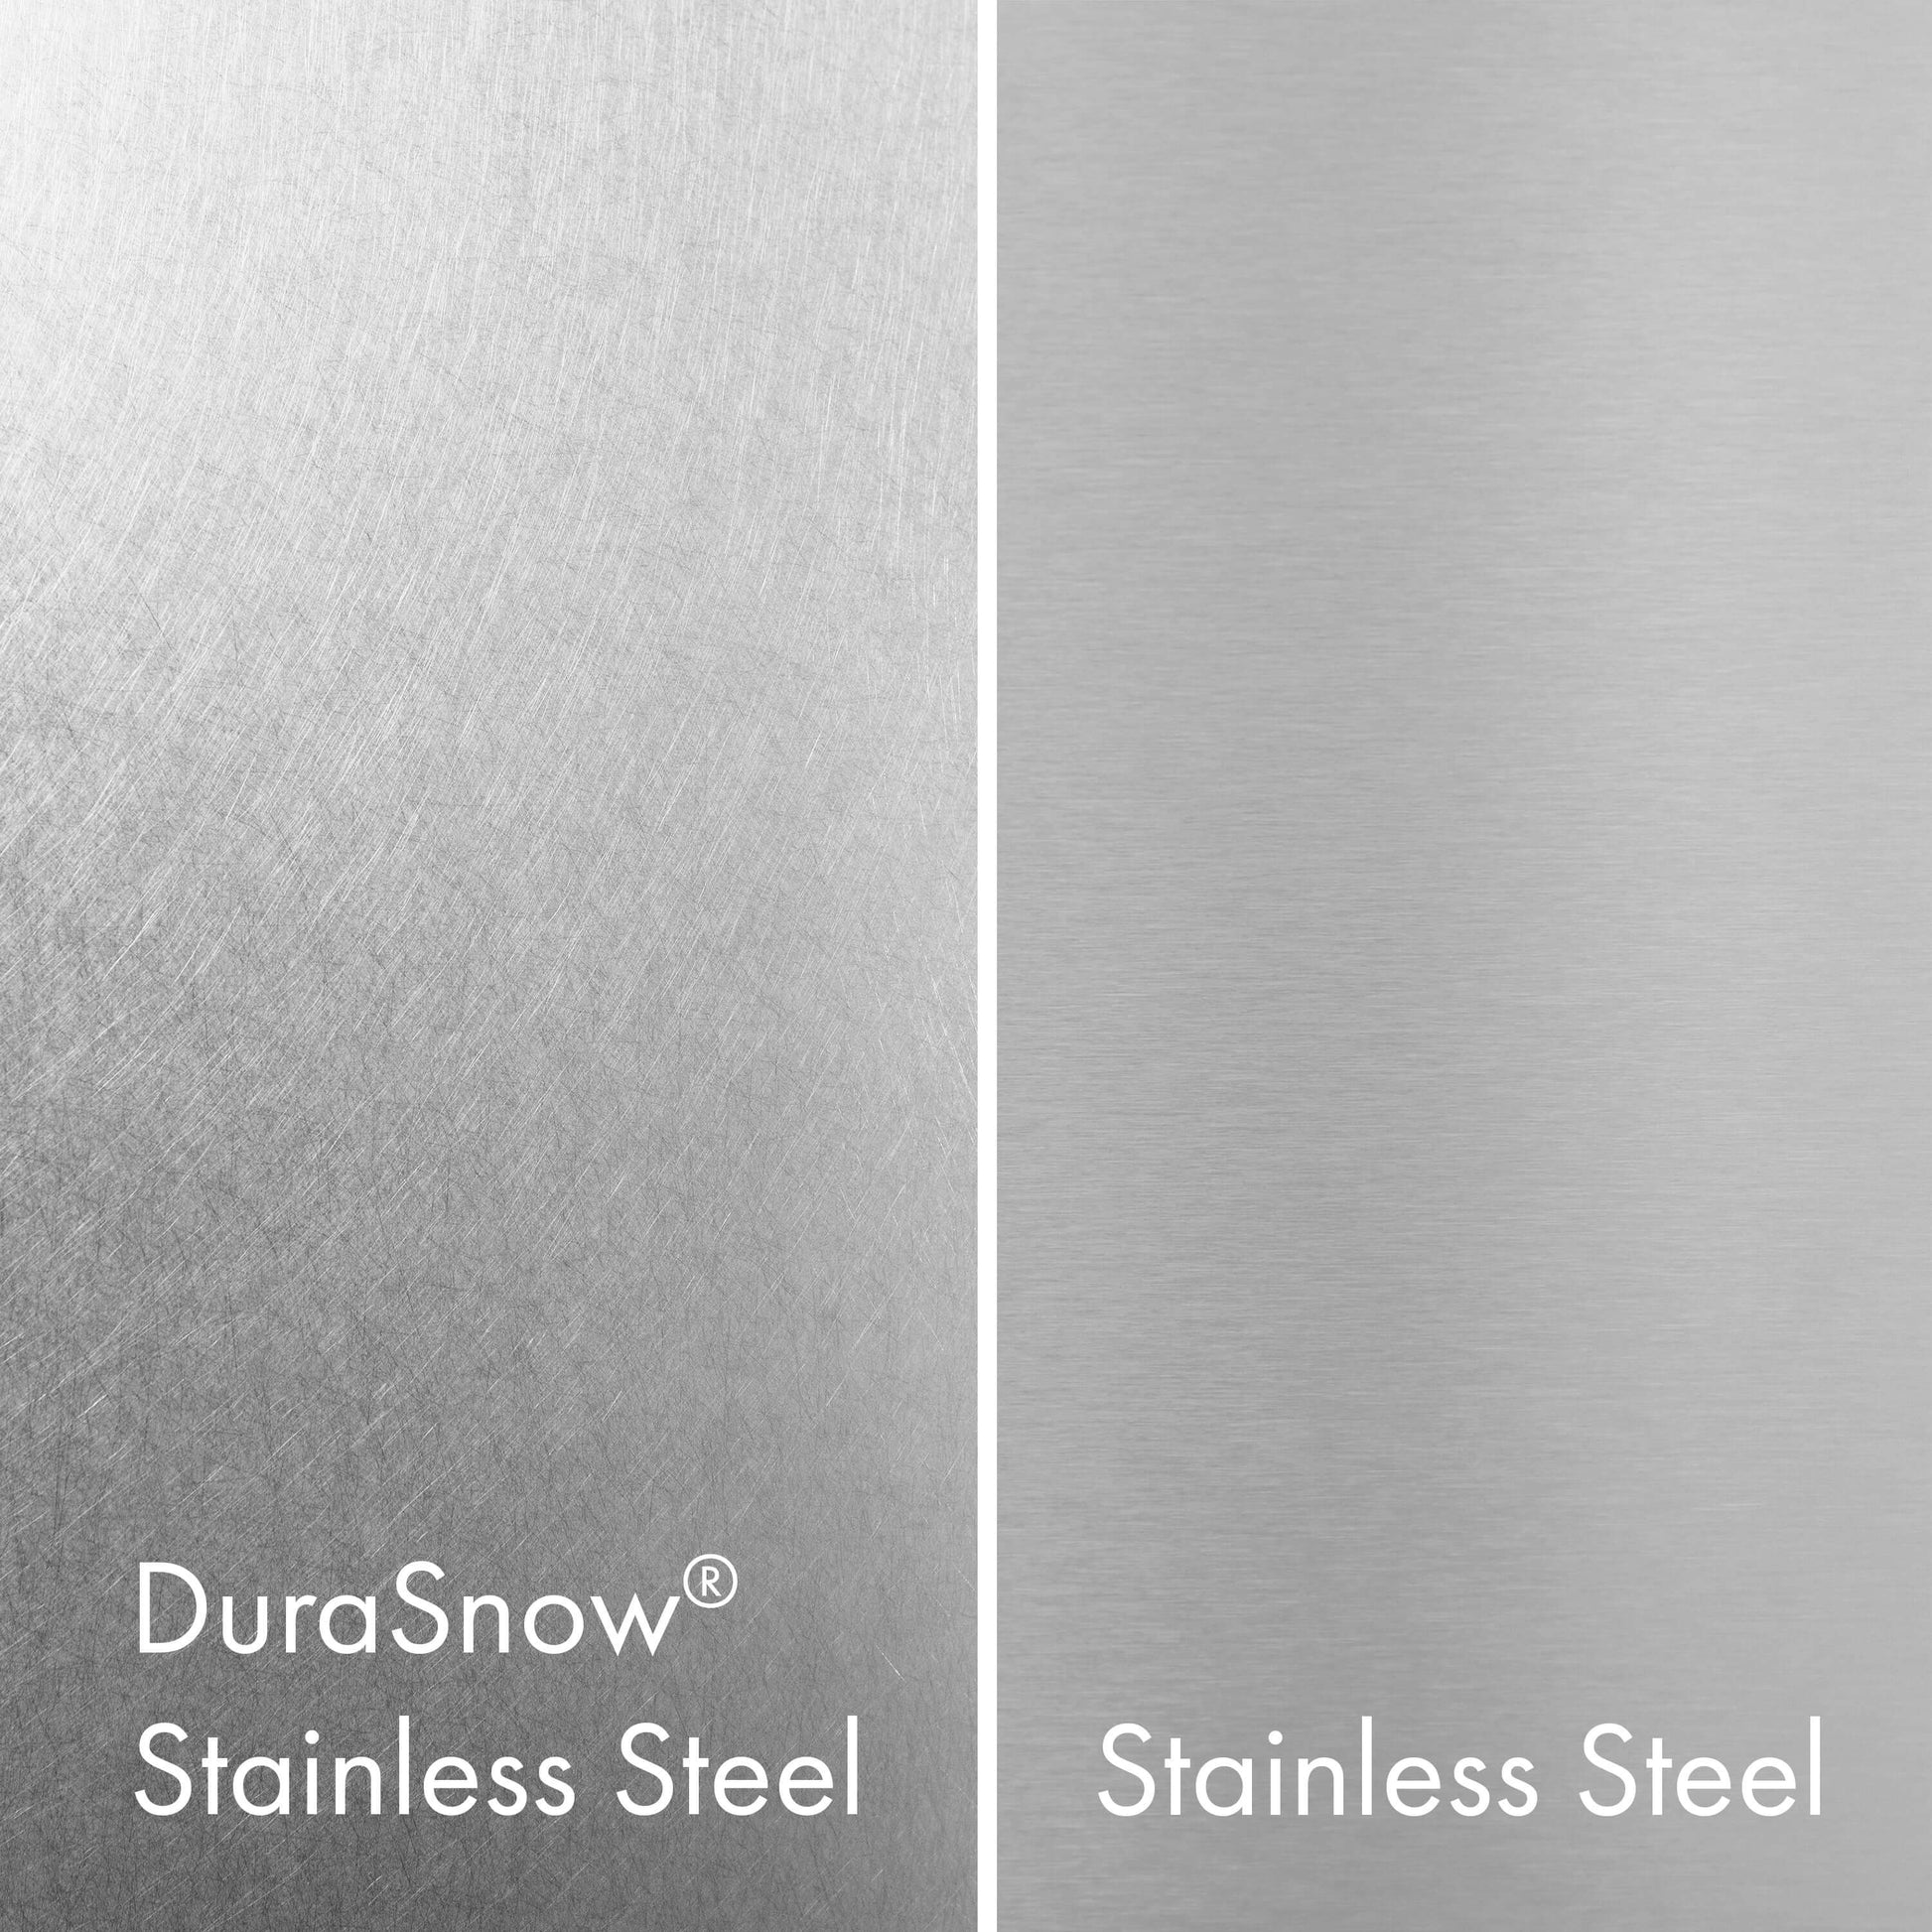 Panels & Handles Only - ZLINE 60" Refrigerator Panels in DuraSnow Stainless